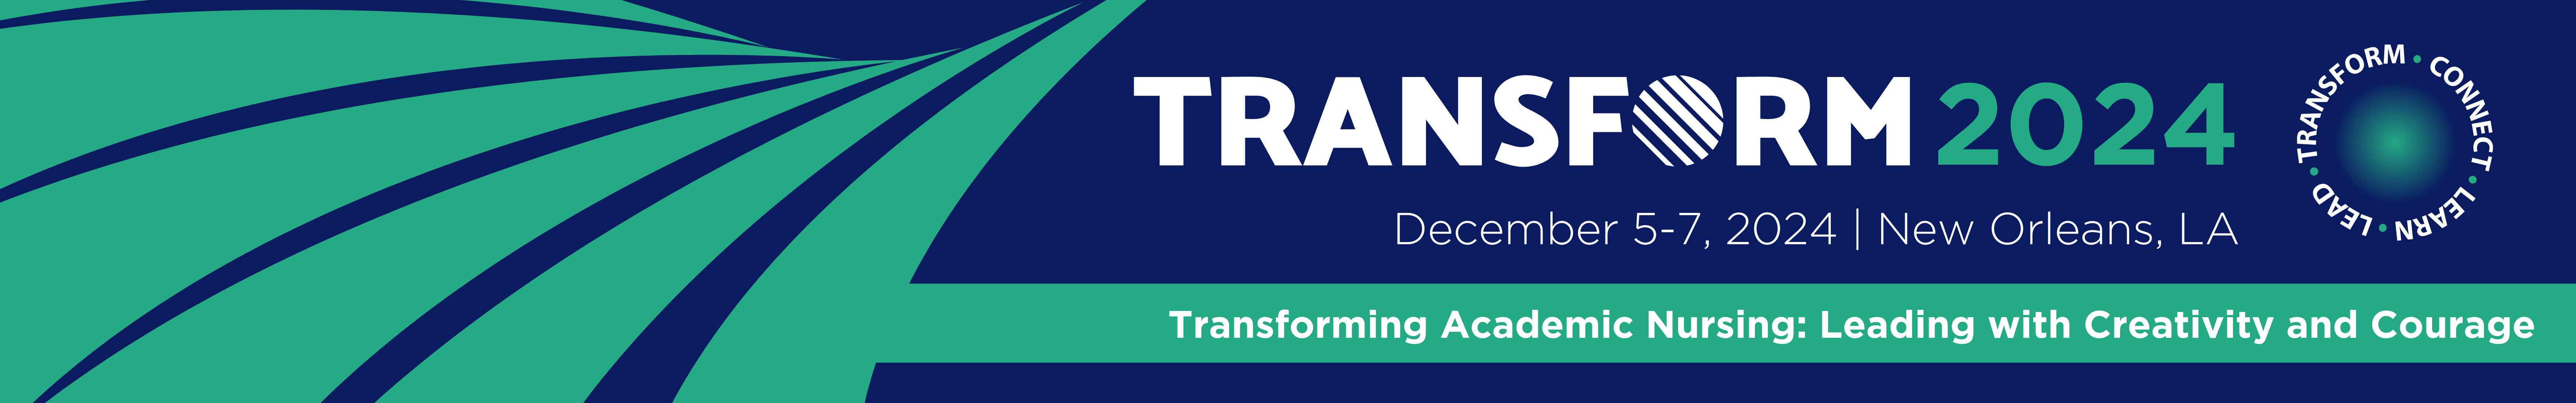 american association of colleges of nursing | the voice of academic nursing | Transform 2023 | Transform. connect. learn. lead